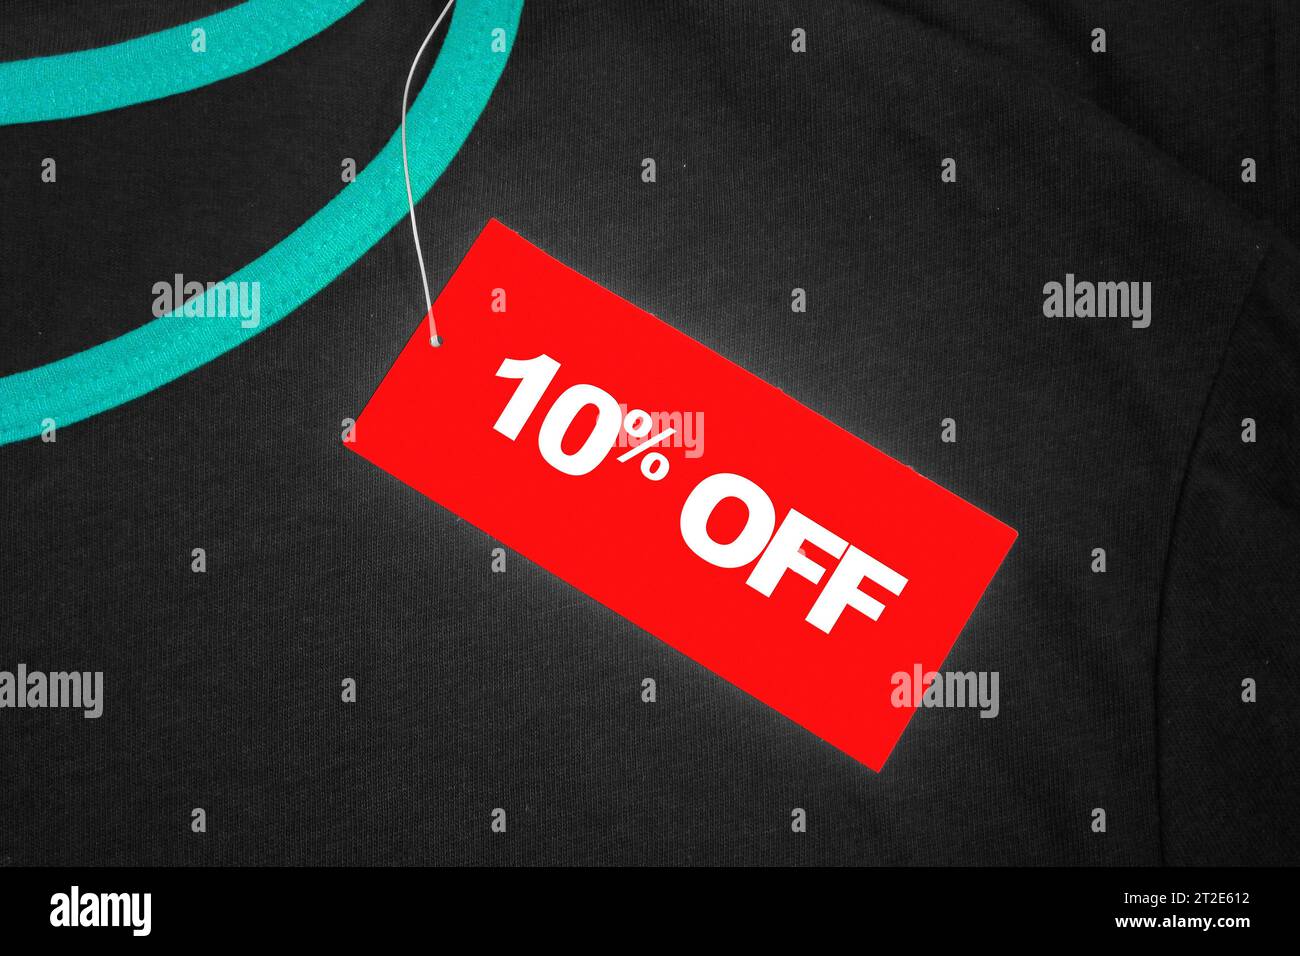 Red tag on a grey and green t-shirt with '10% off' written in white. Stock Photo